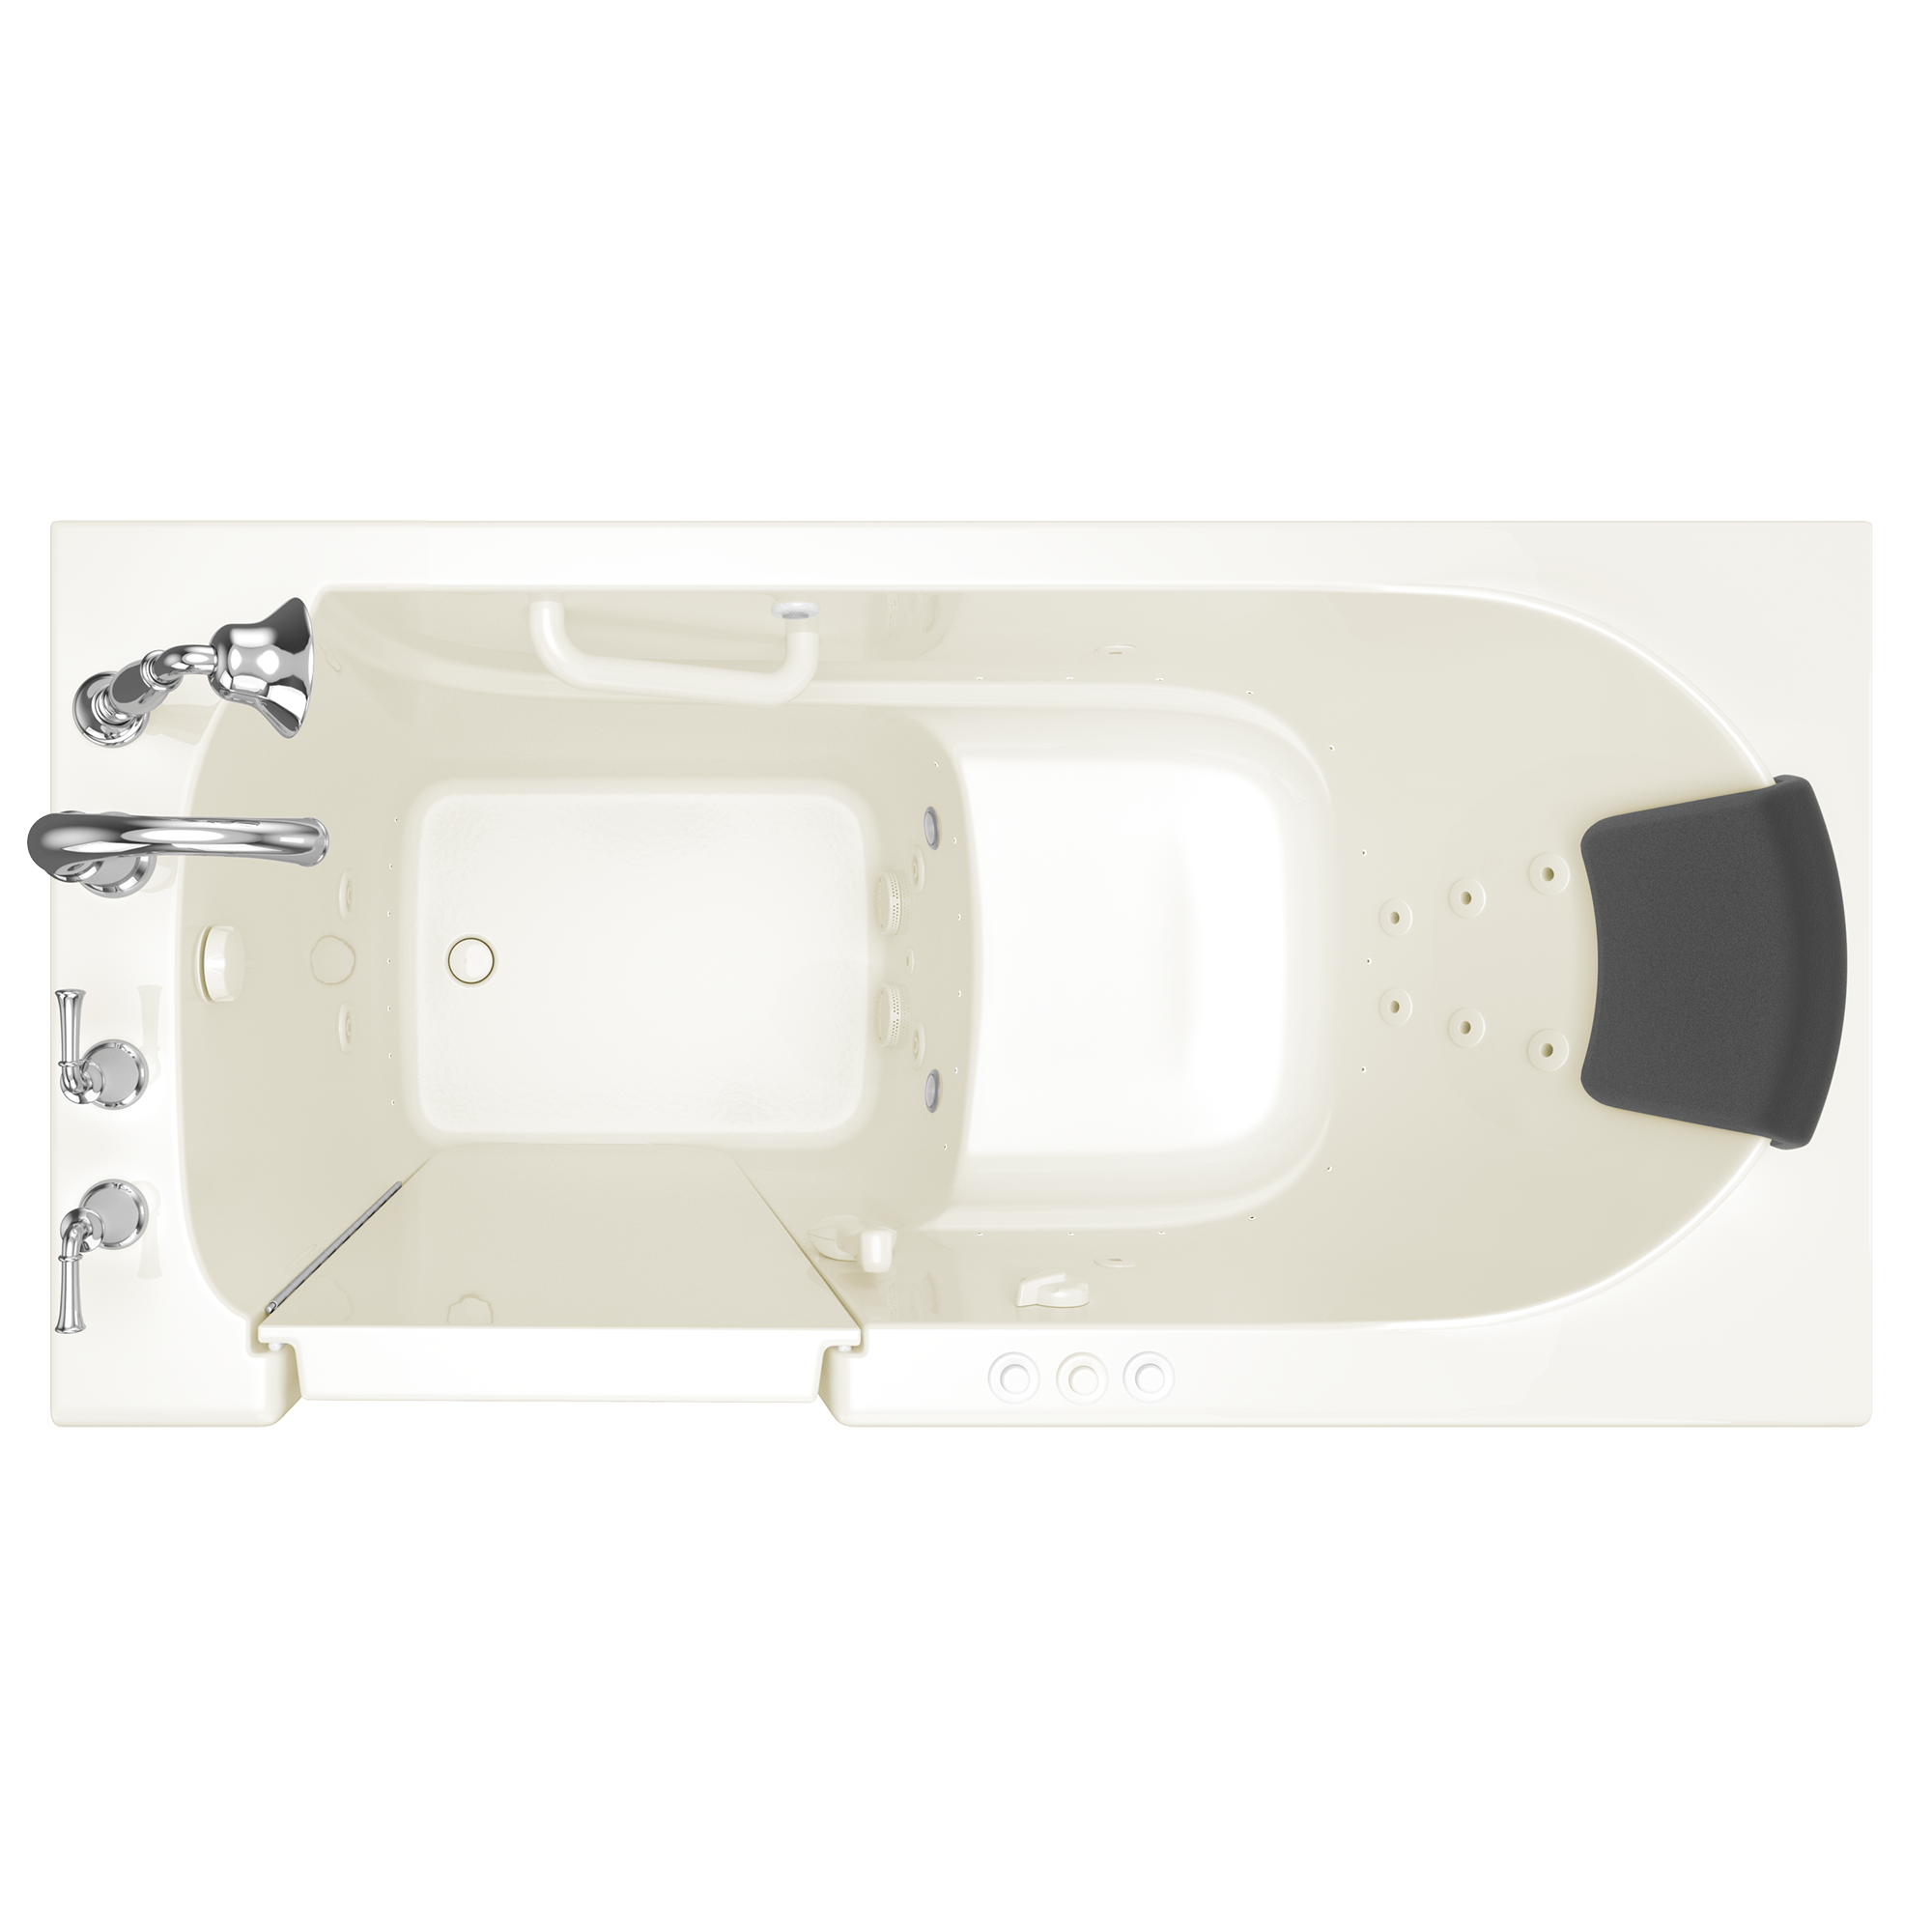 Gelcoat Premium Series 60x30 Inch Walk-In Bathtub with Dual Air Massage and Jet Massage System - Left Hand Door and Drain